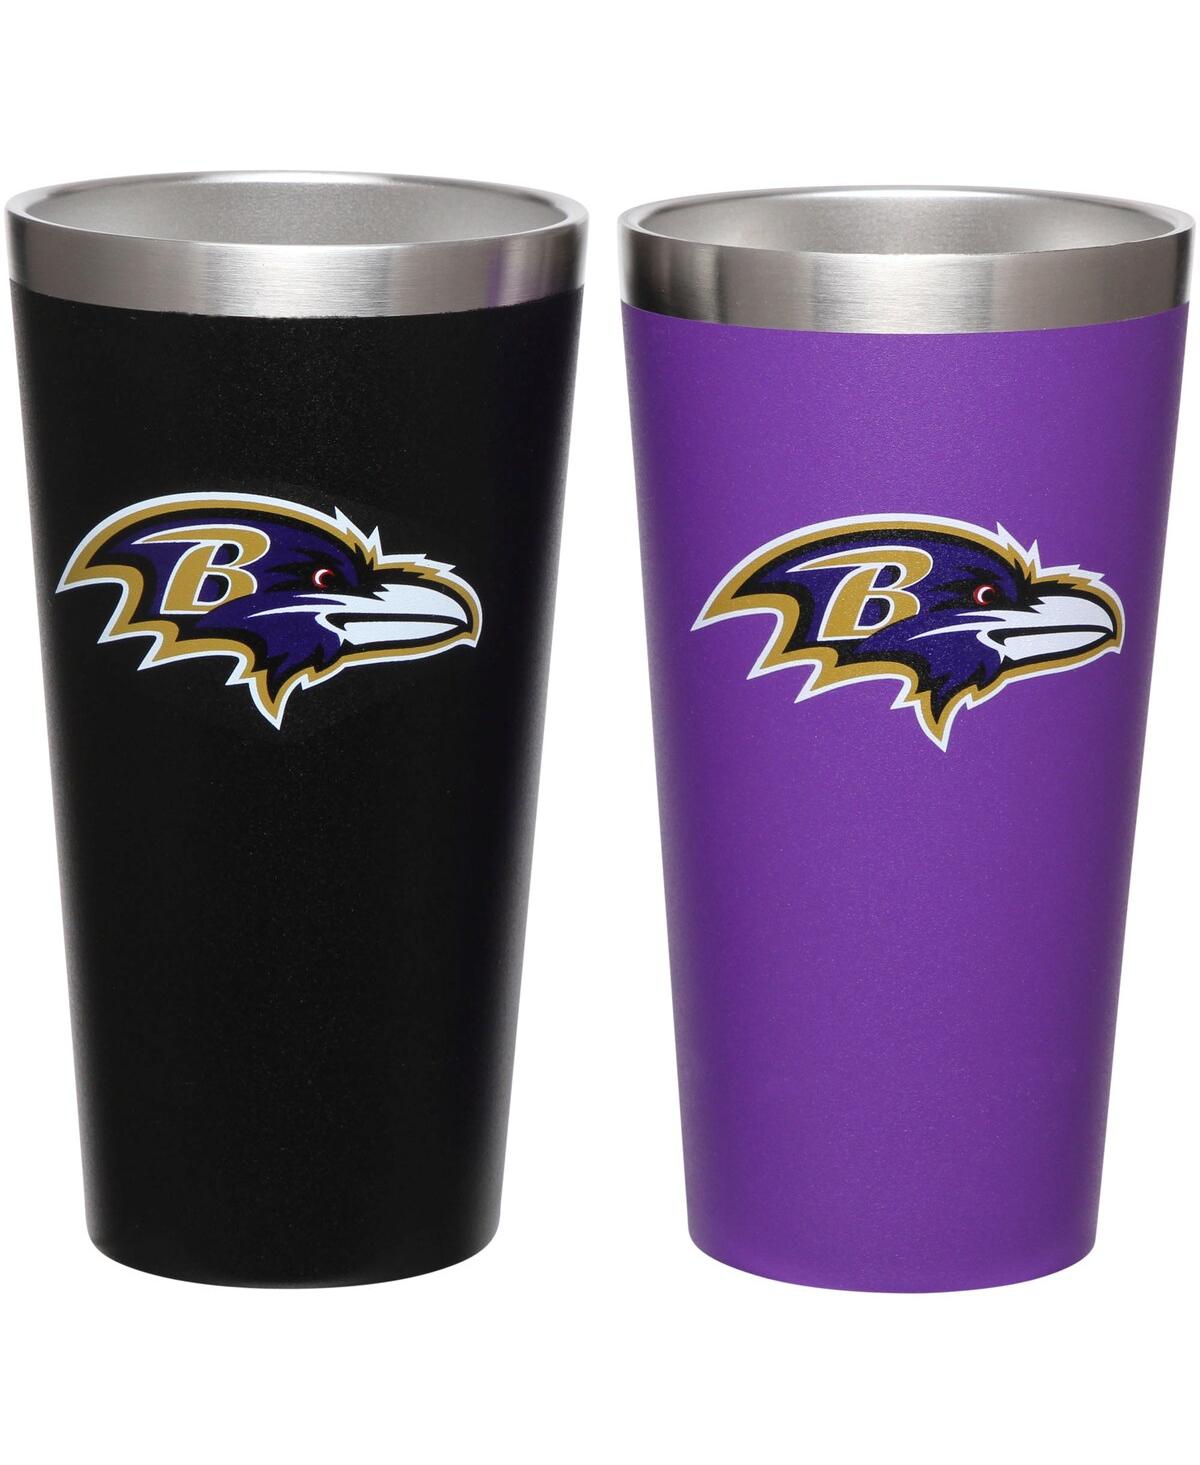 Memory Company Baltimore Ravens Team Color 2-pack 16 oz Pint Glass Set In Multi